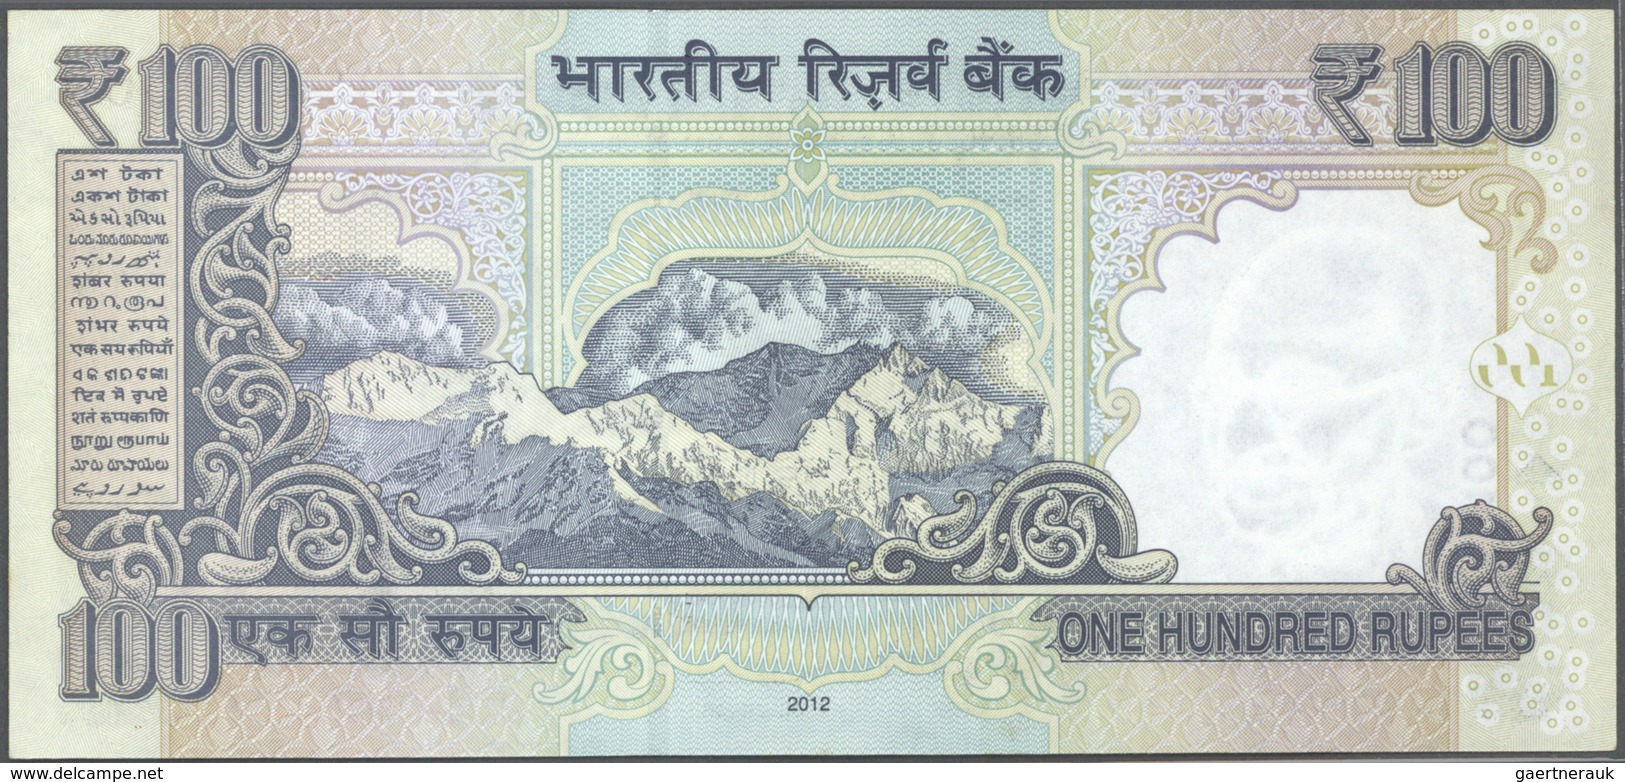 India / Indien: set of 9 notes 100 Rupees 2009 P. 98 all with interesting serial number containing: